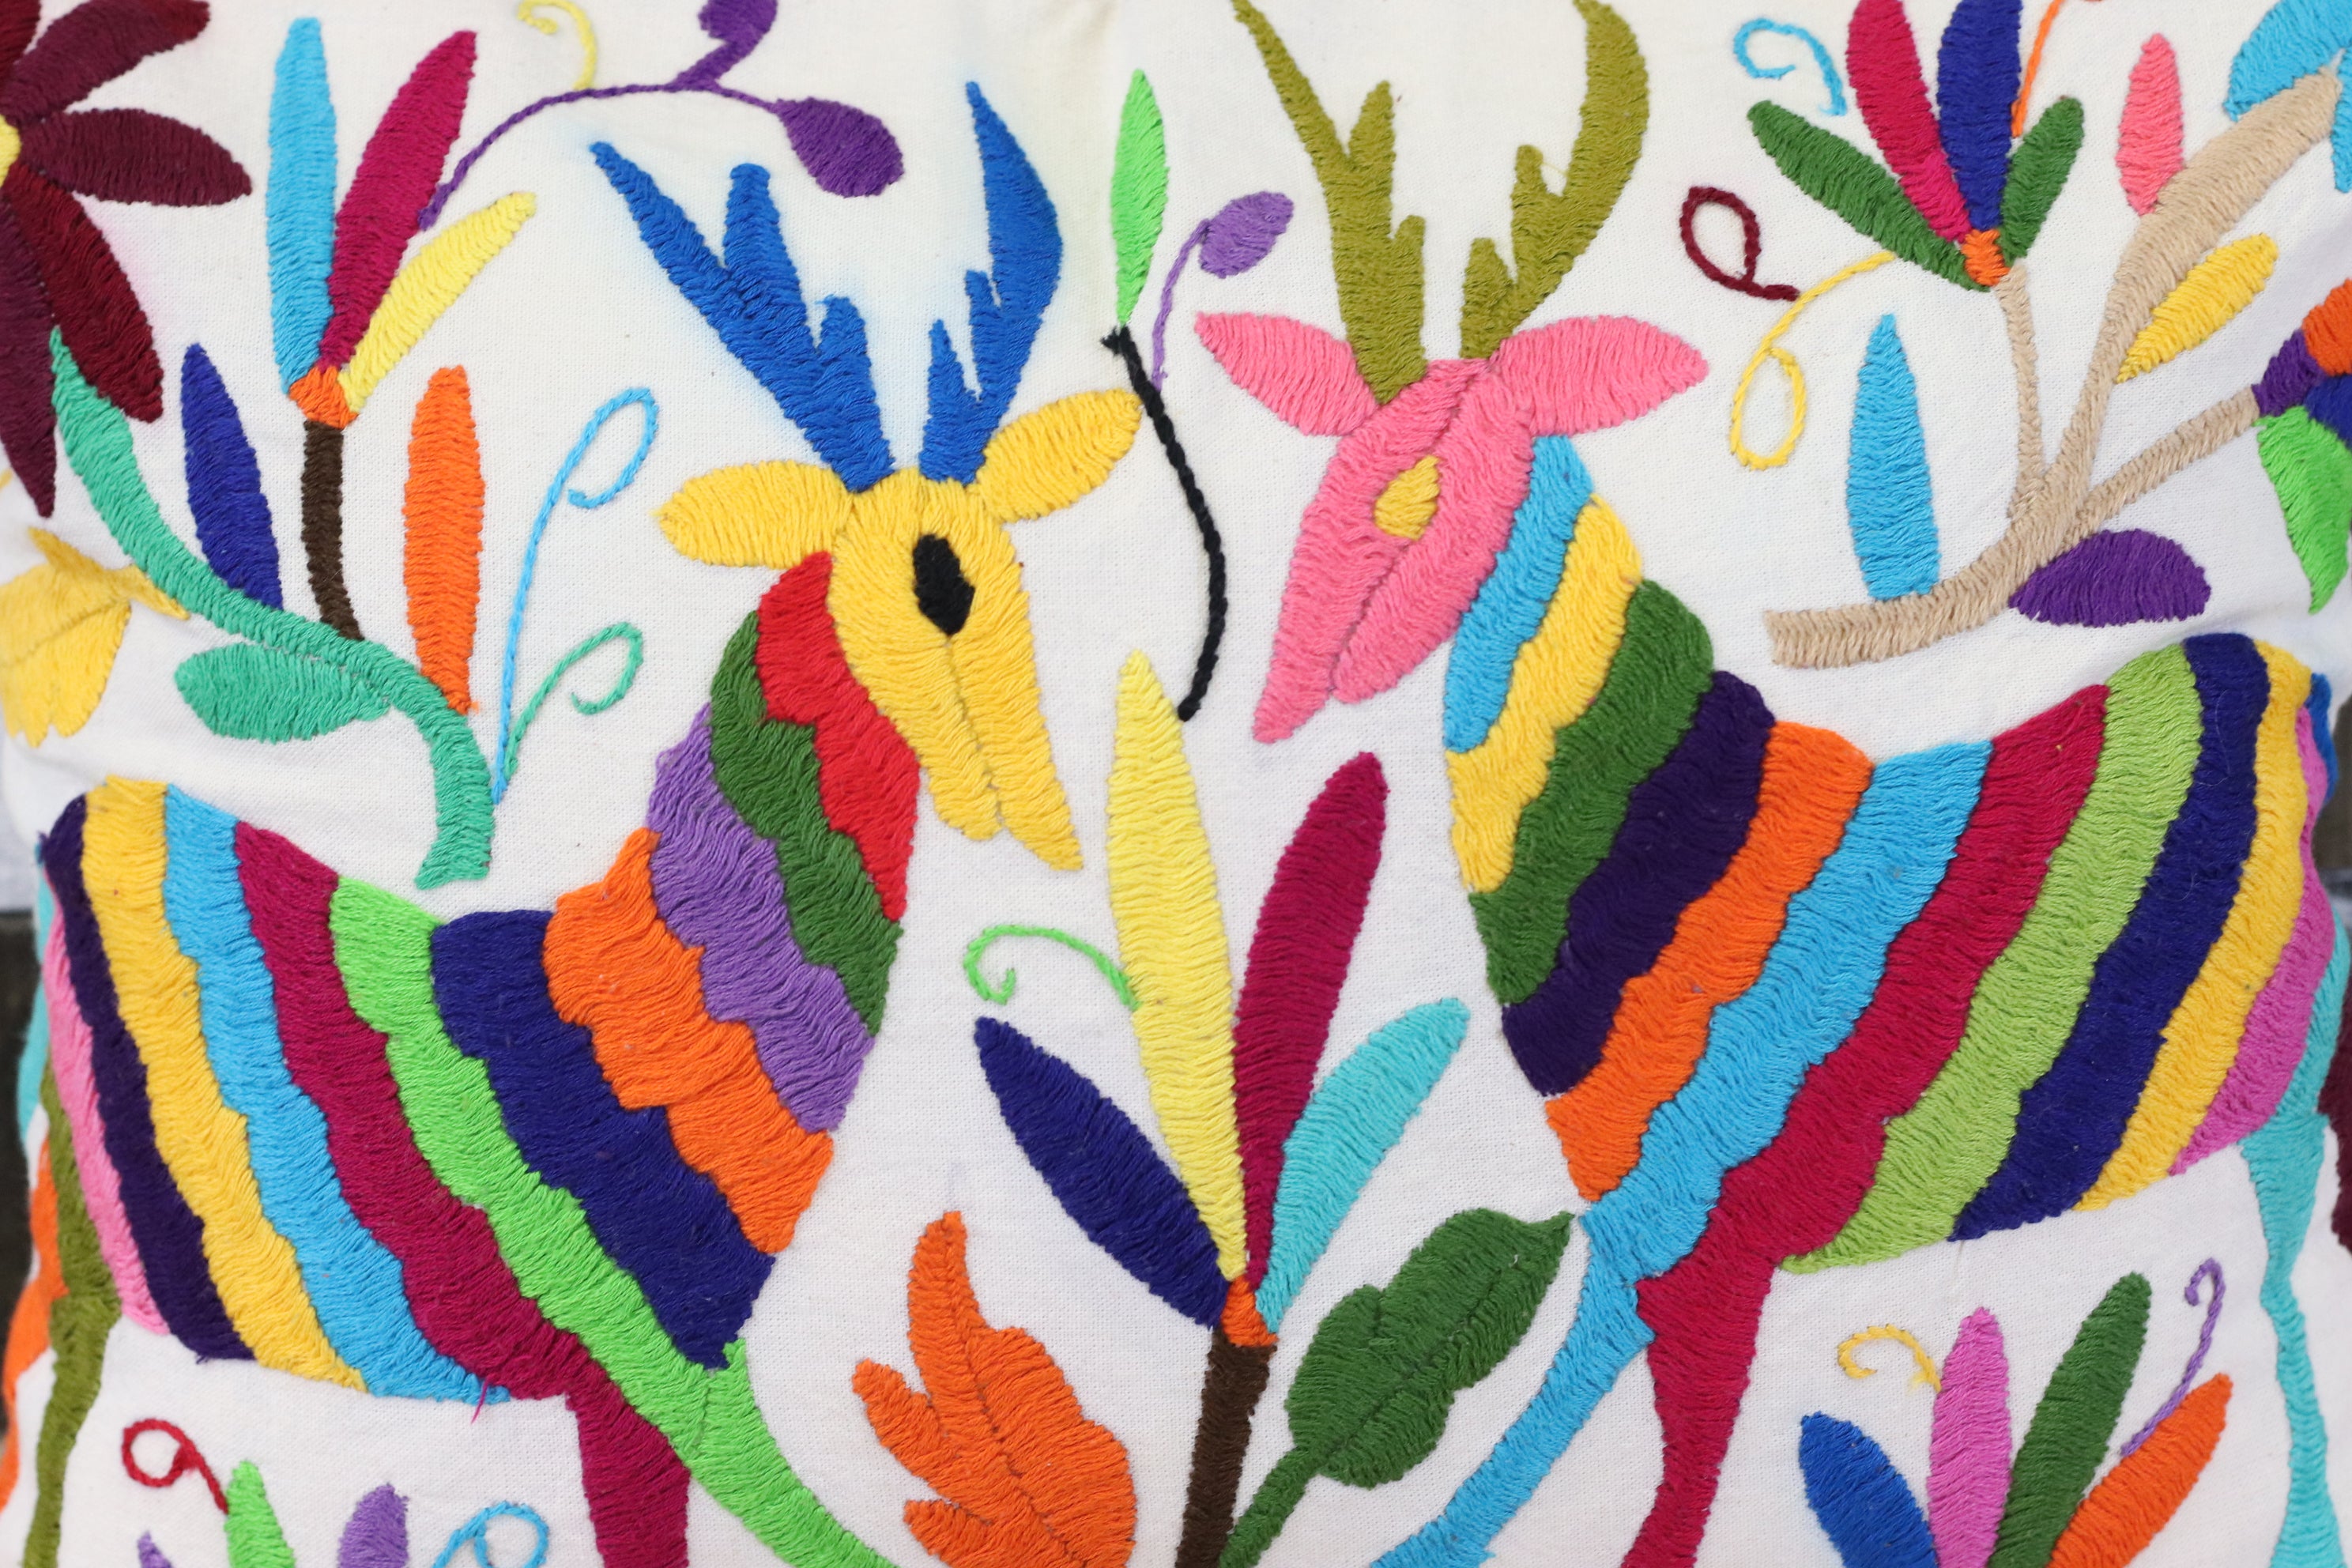 Otomi Tenango Pillow Cover Hand Embroidered with Flowers and Animals in Vibrant Colors. Handmade in Mexico. Ships from the USA. Buy now at www.felipeandgrace.com. 